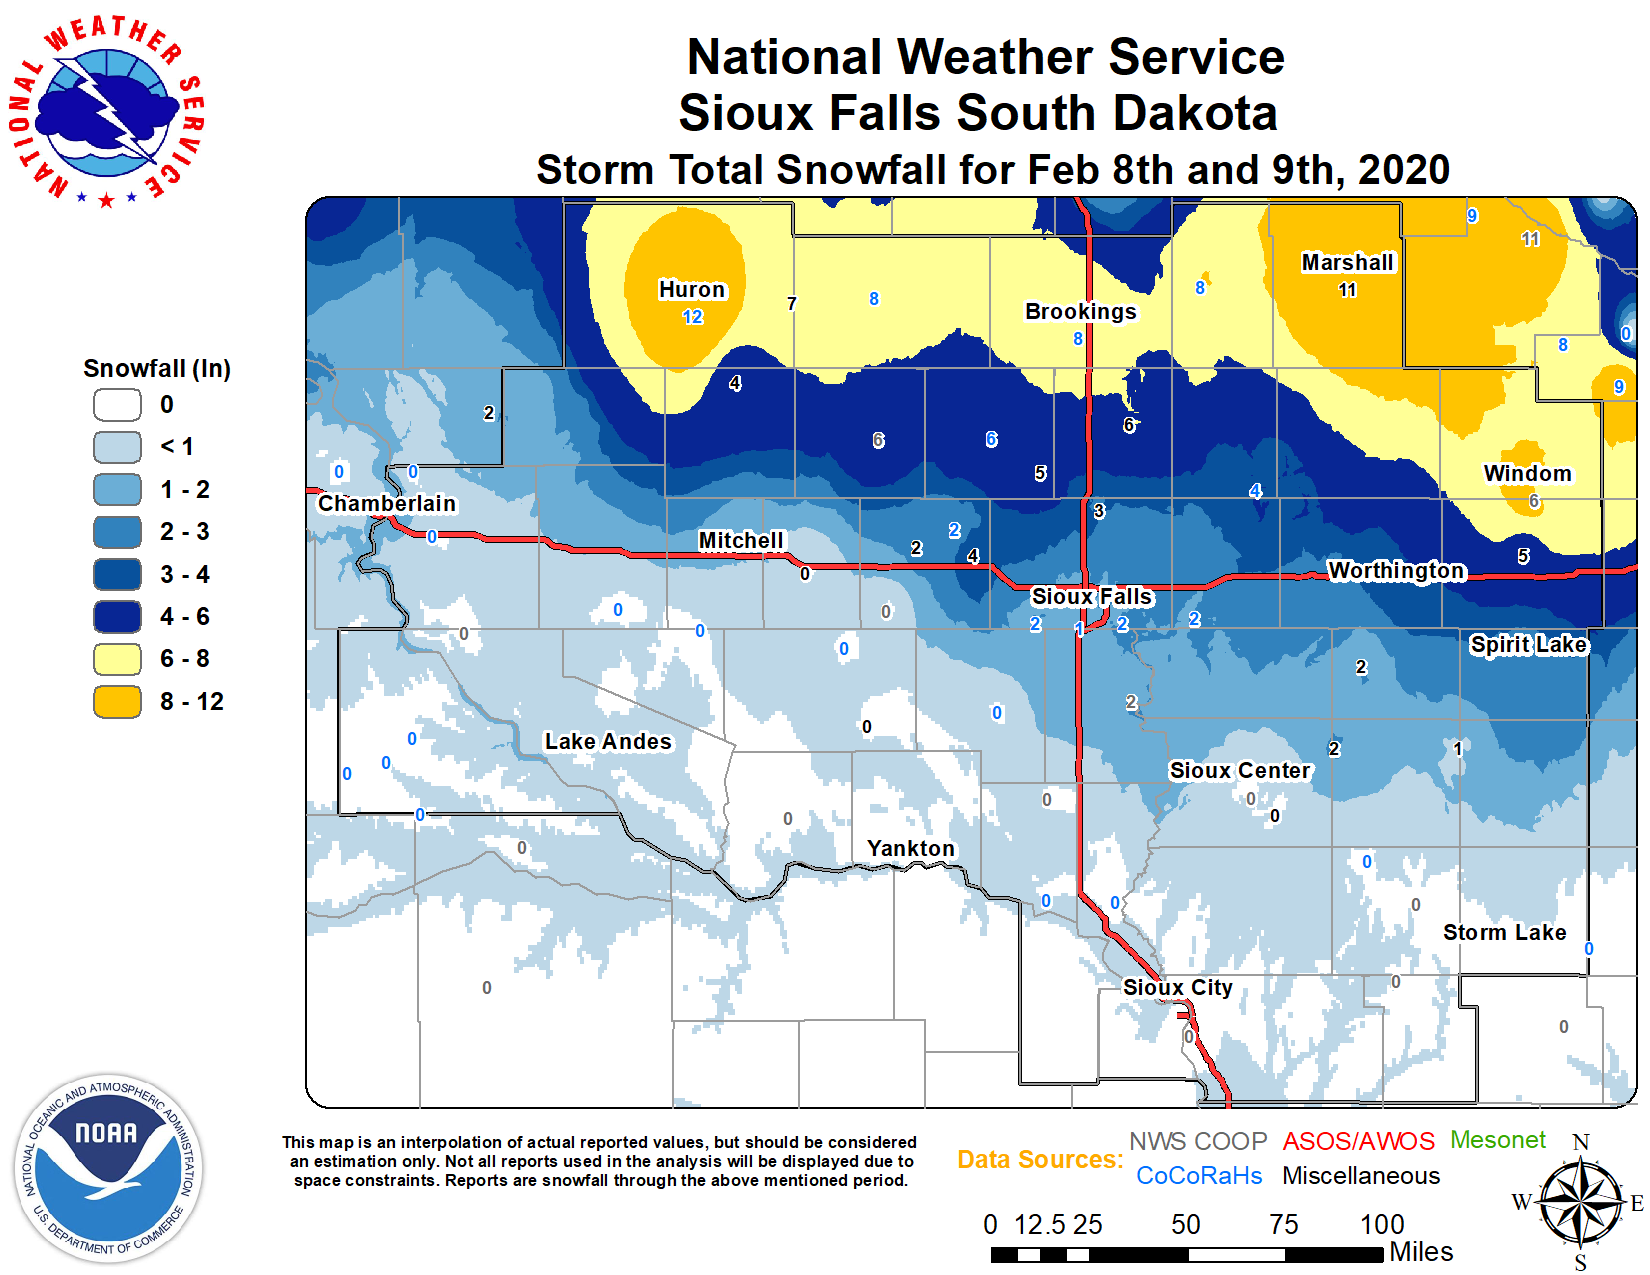 Band of Heavy Snow Across East Central South Dakota Into Southwest